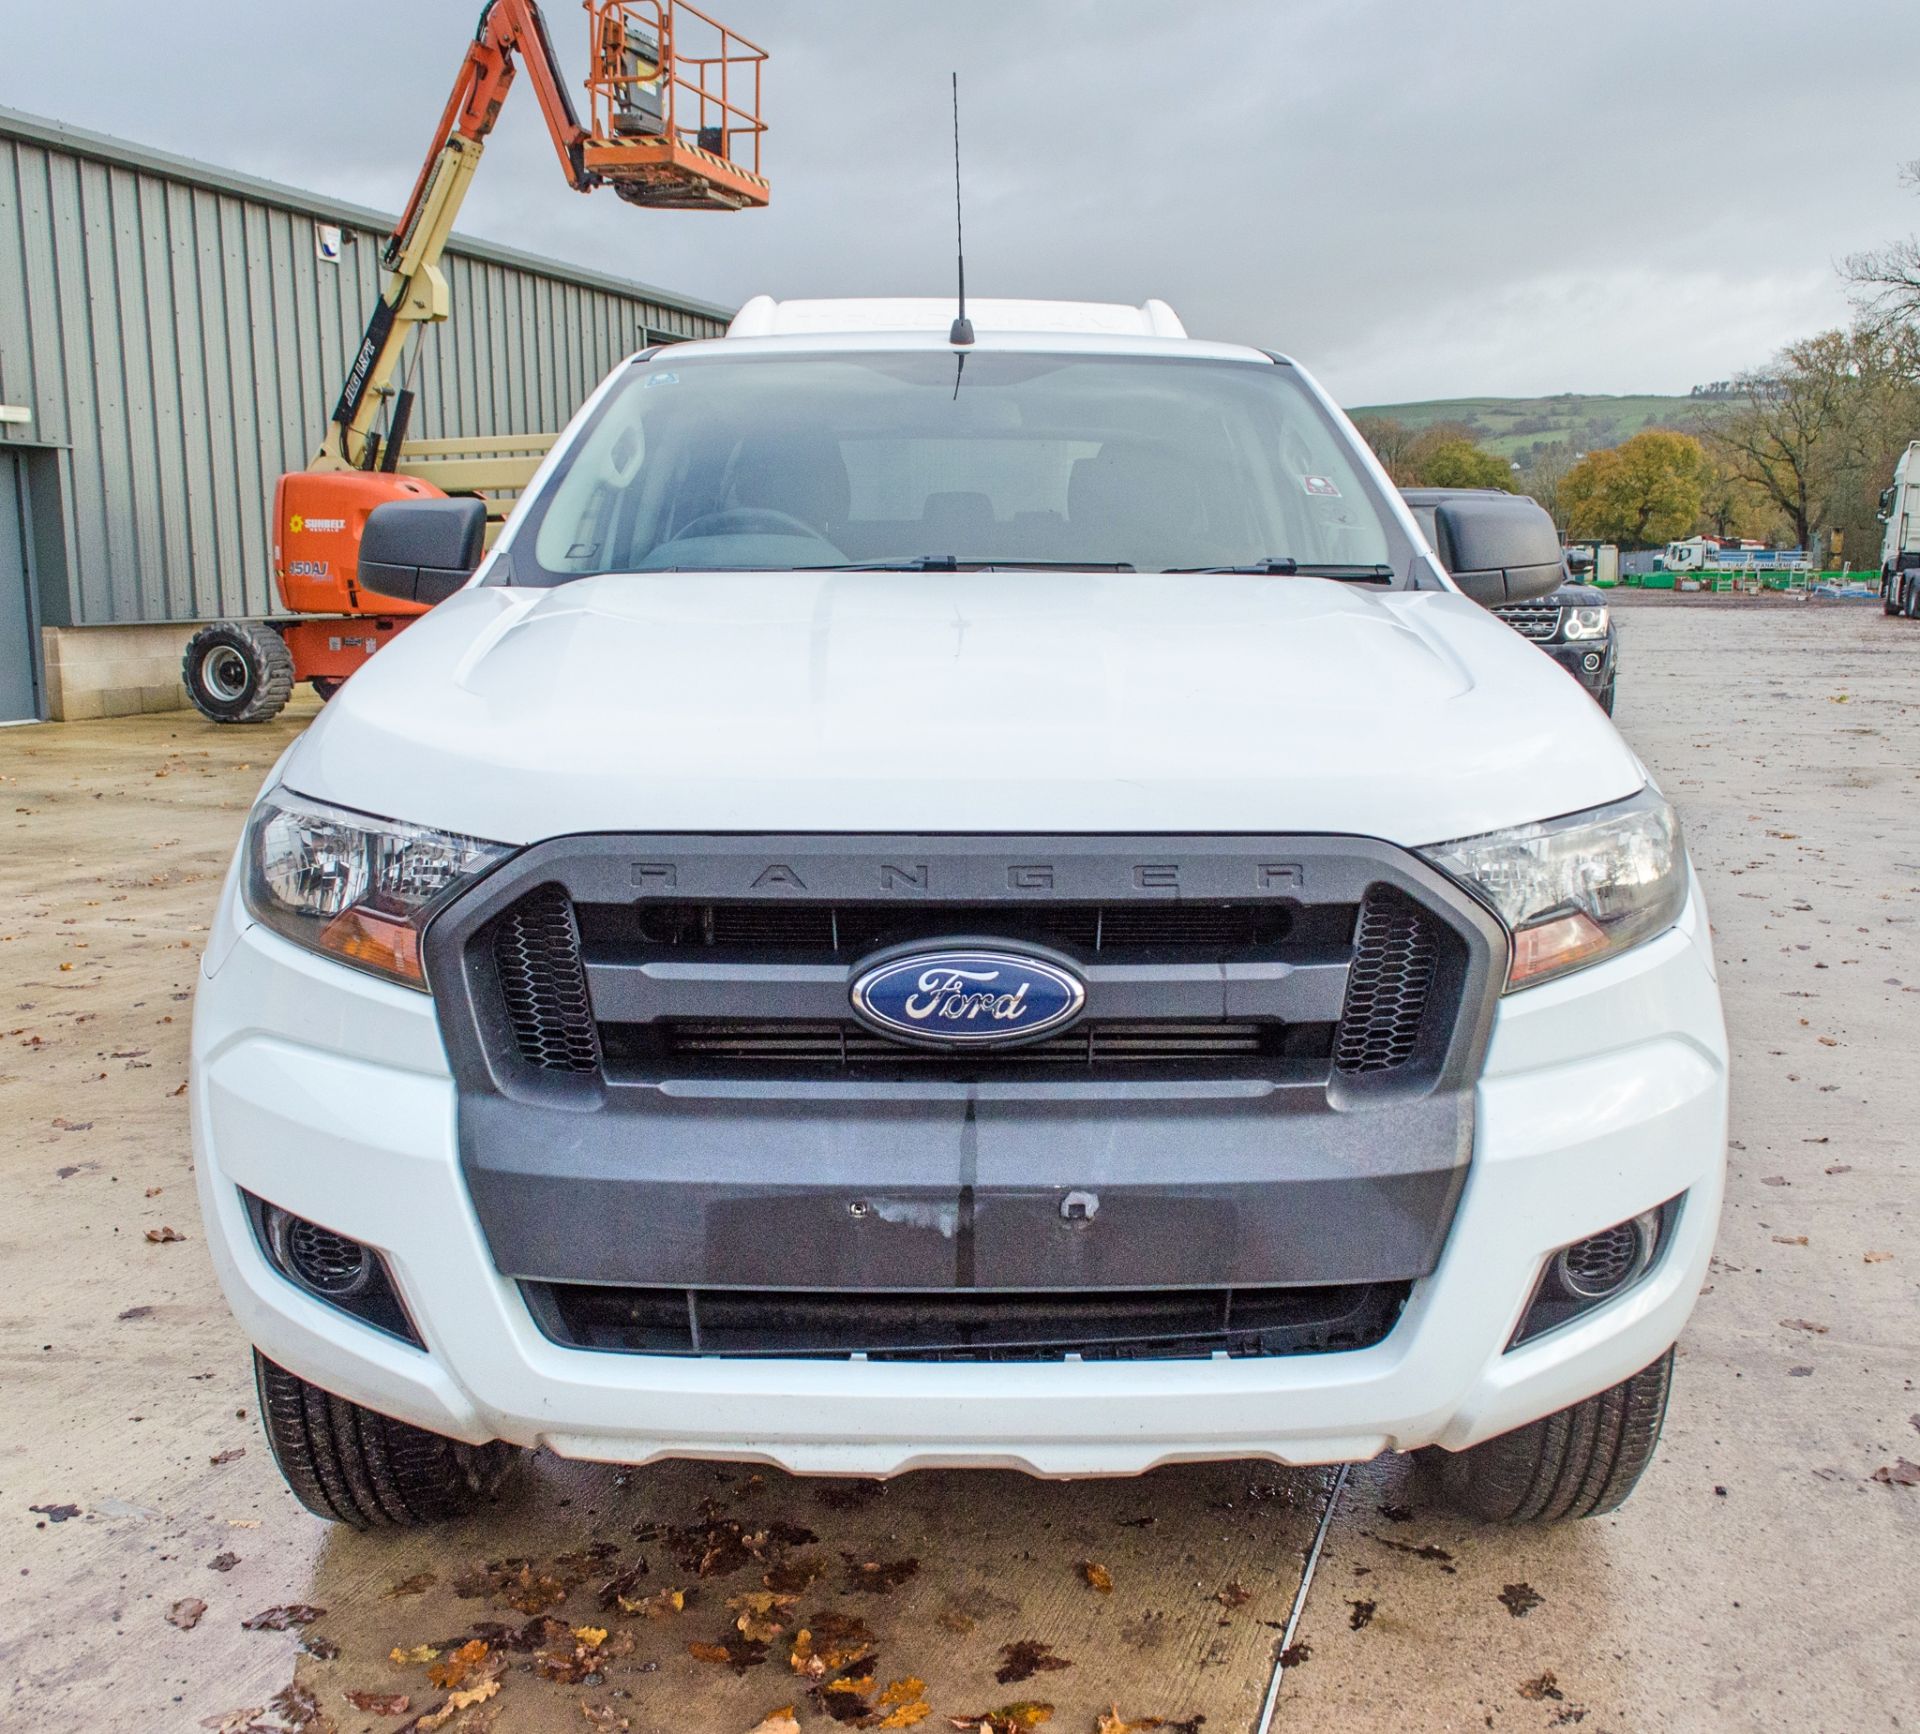 Ford Ranger 2.2 TDCi 160 XL manual 4x4 double cab pick up VIN: 6FPPXXMJ2PGL11353 Date of - Image 5 of 31